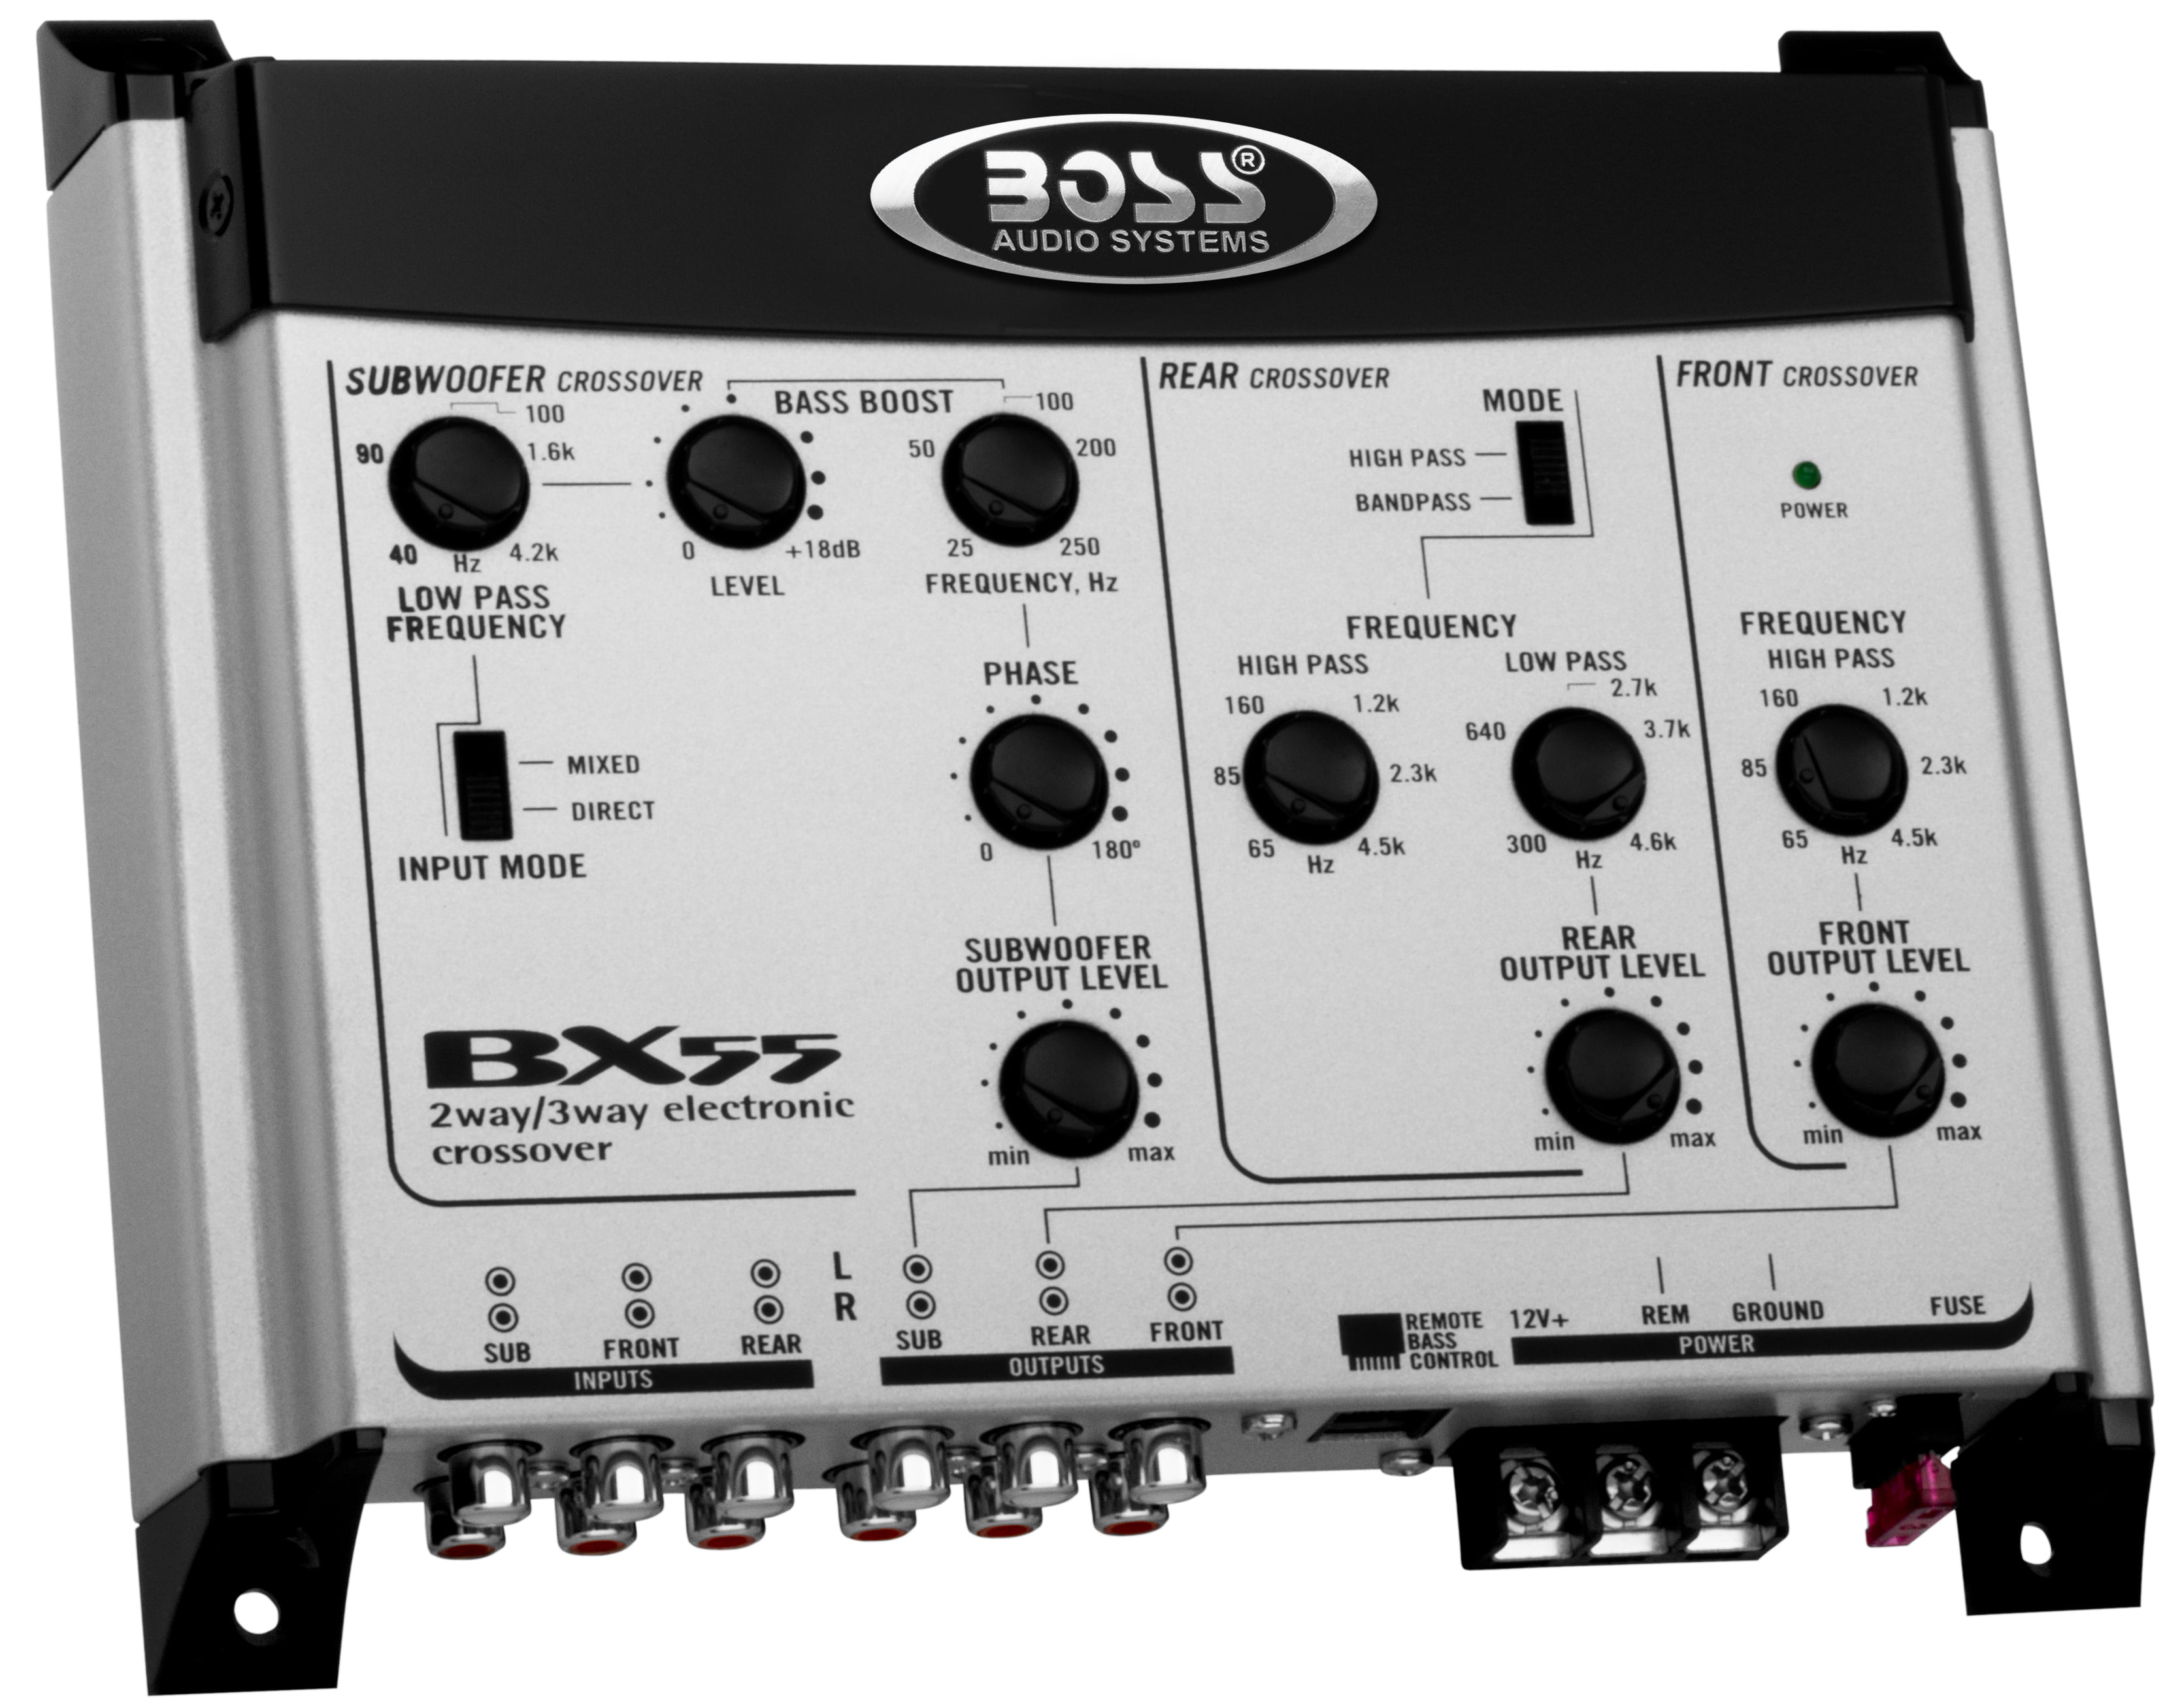 BOSS Audio Systems BX55 2 3 Way Pre-Amp Car Electronic Crossover with Remote Subwoofer Control 